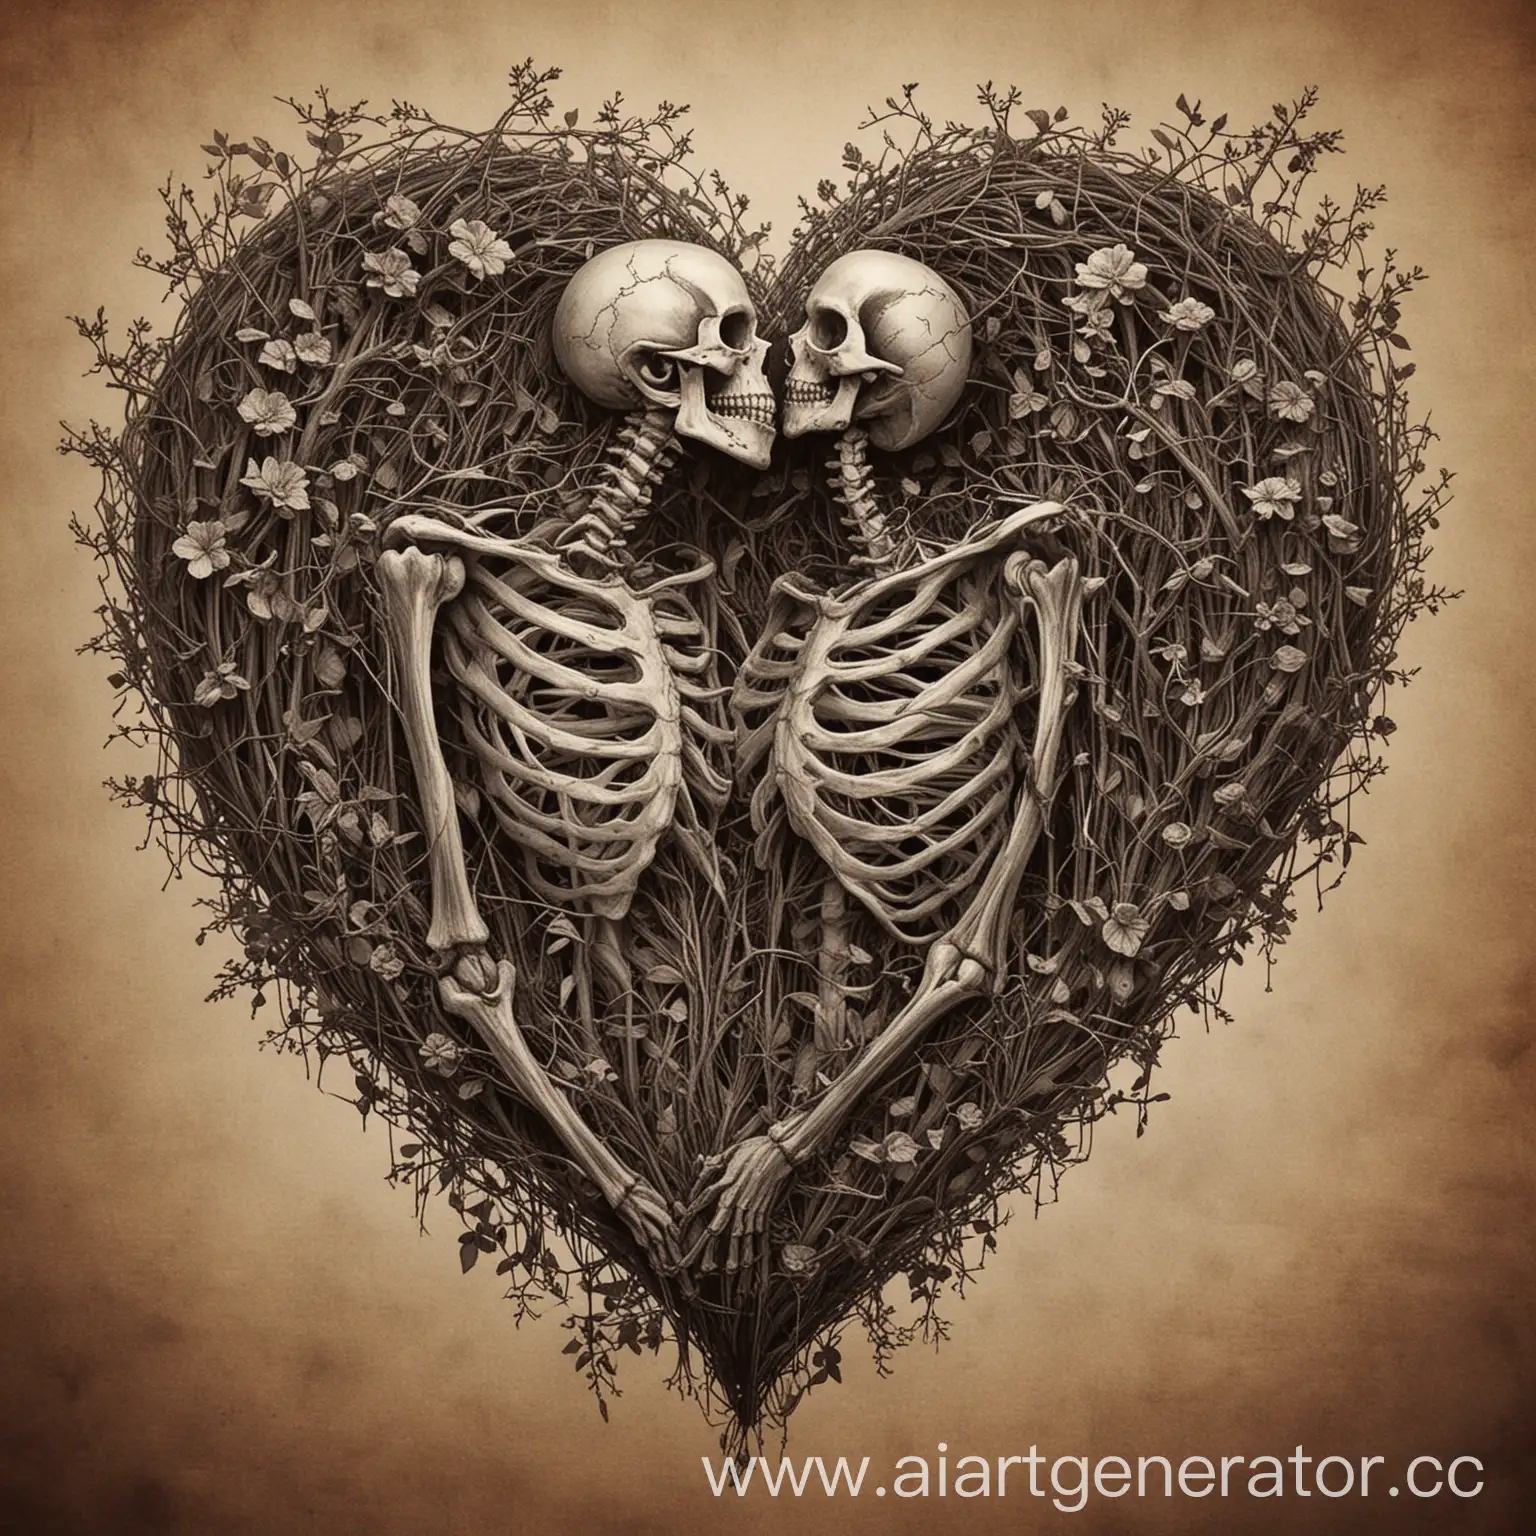 Act like a tattoo artist, draw me a sketch, draw a heart from thorn bushes and put skeletons inside this heart that kiss